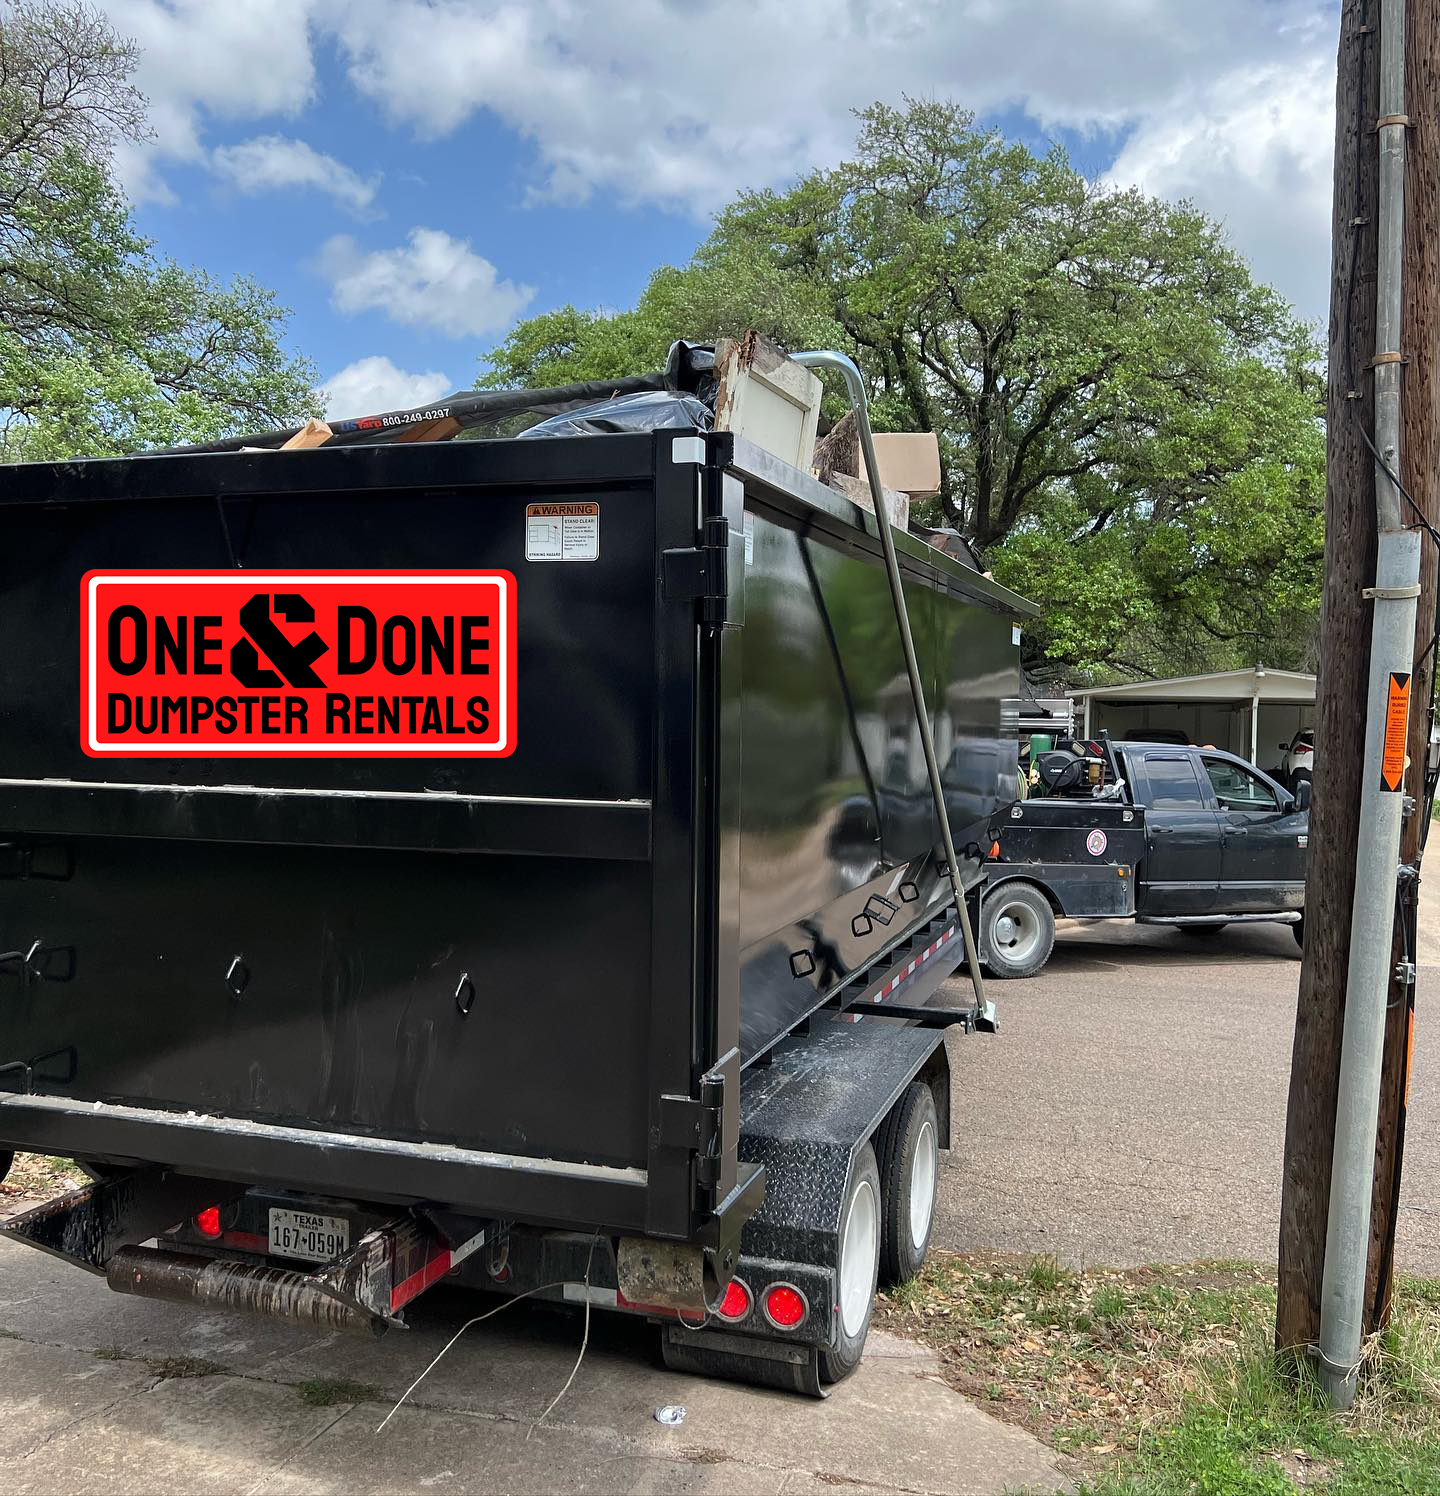 Dumpster Rental One and Done Dumpster Rentals China Spring TX